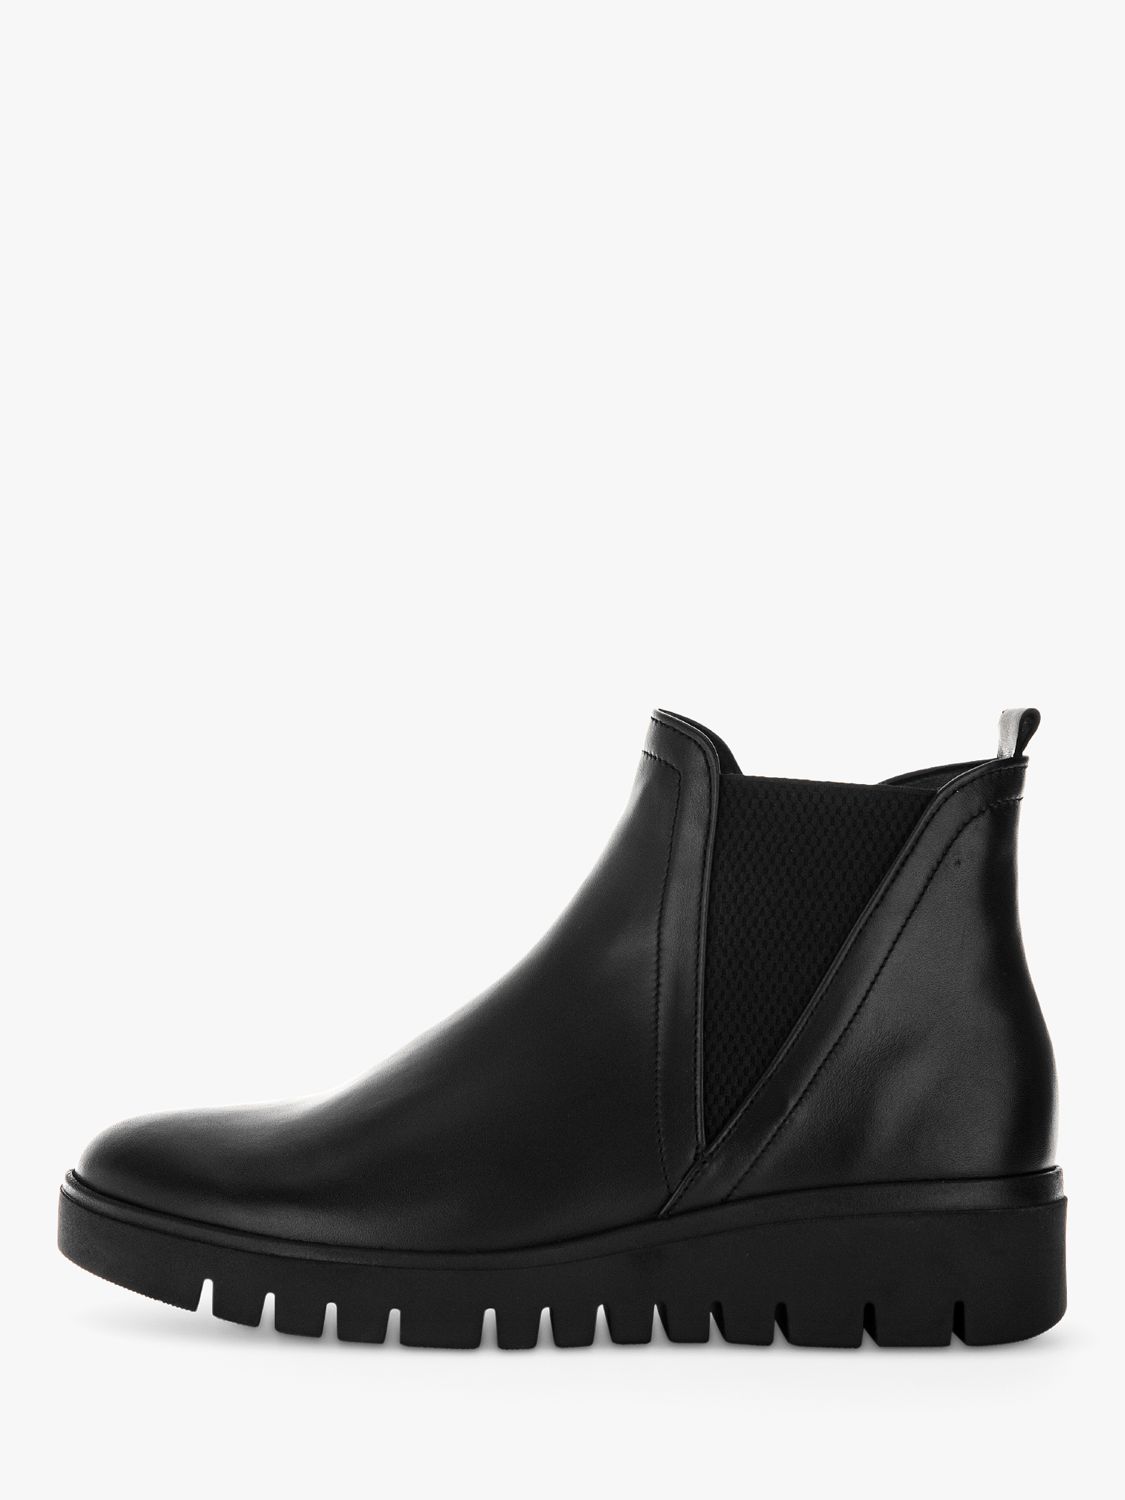 Gabor Dublin Wide Fit Leather Chelsea Boots, Black